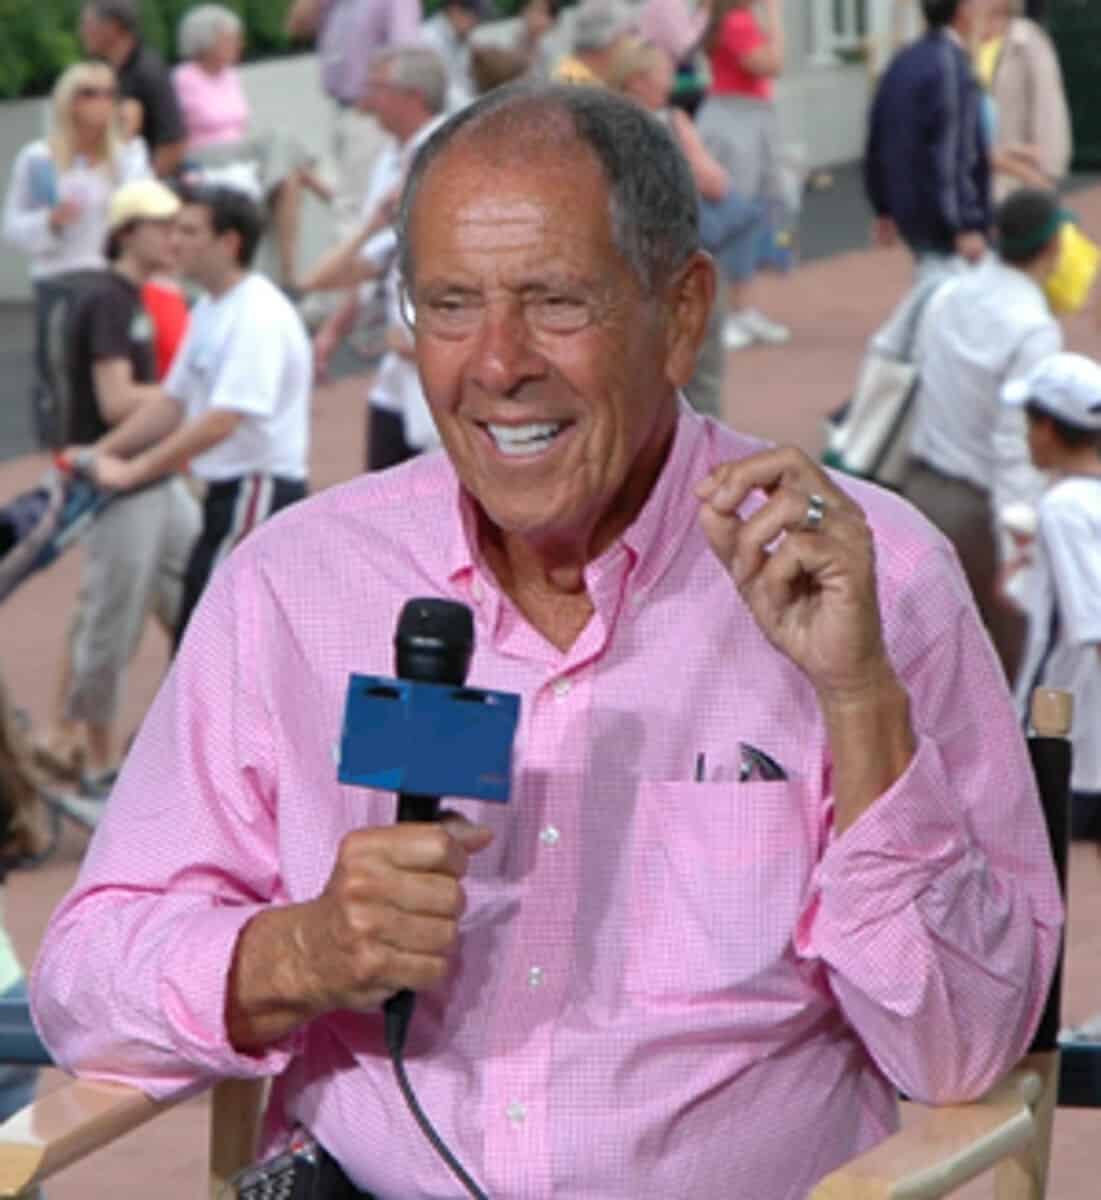 Nick Bollettieri net worth in Sports & Athletes category